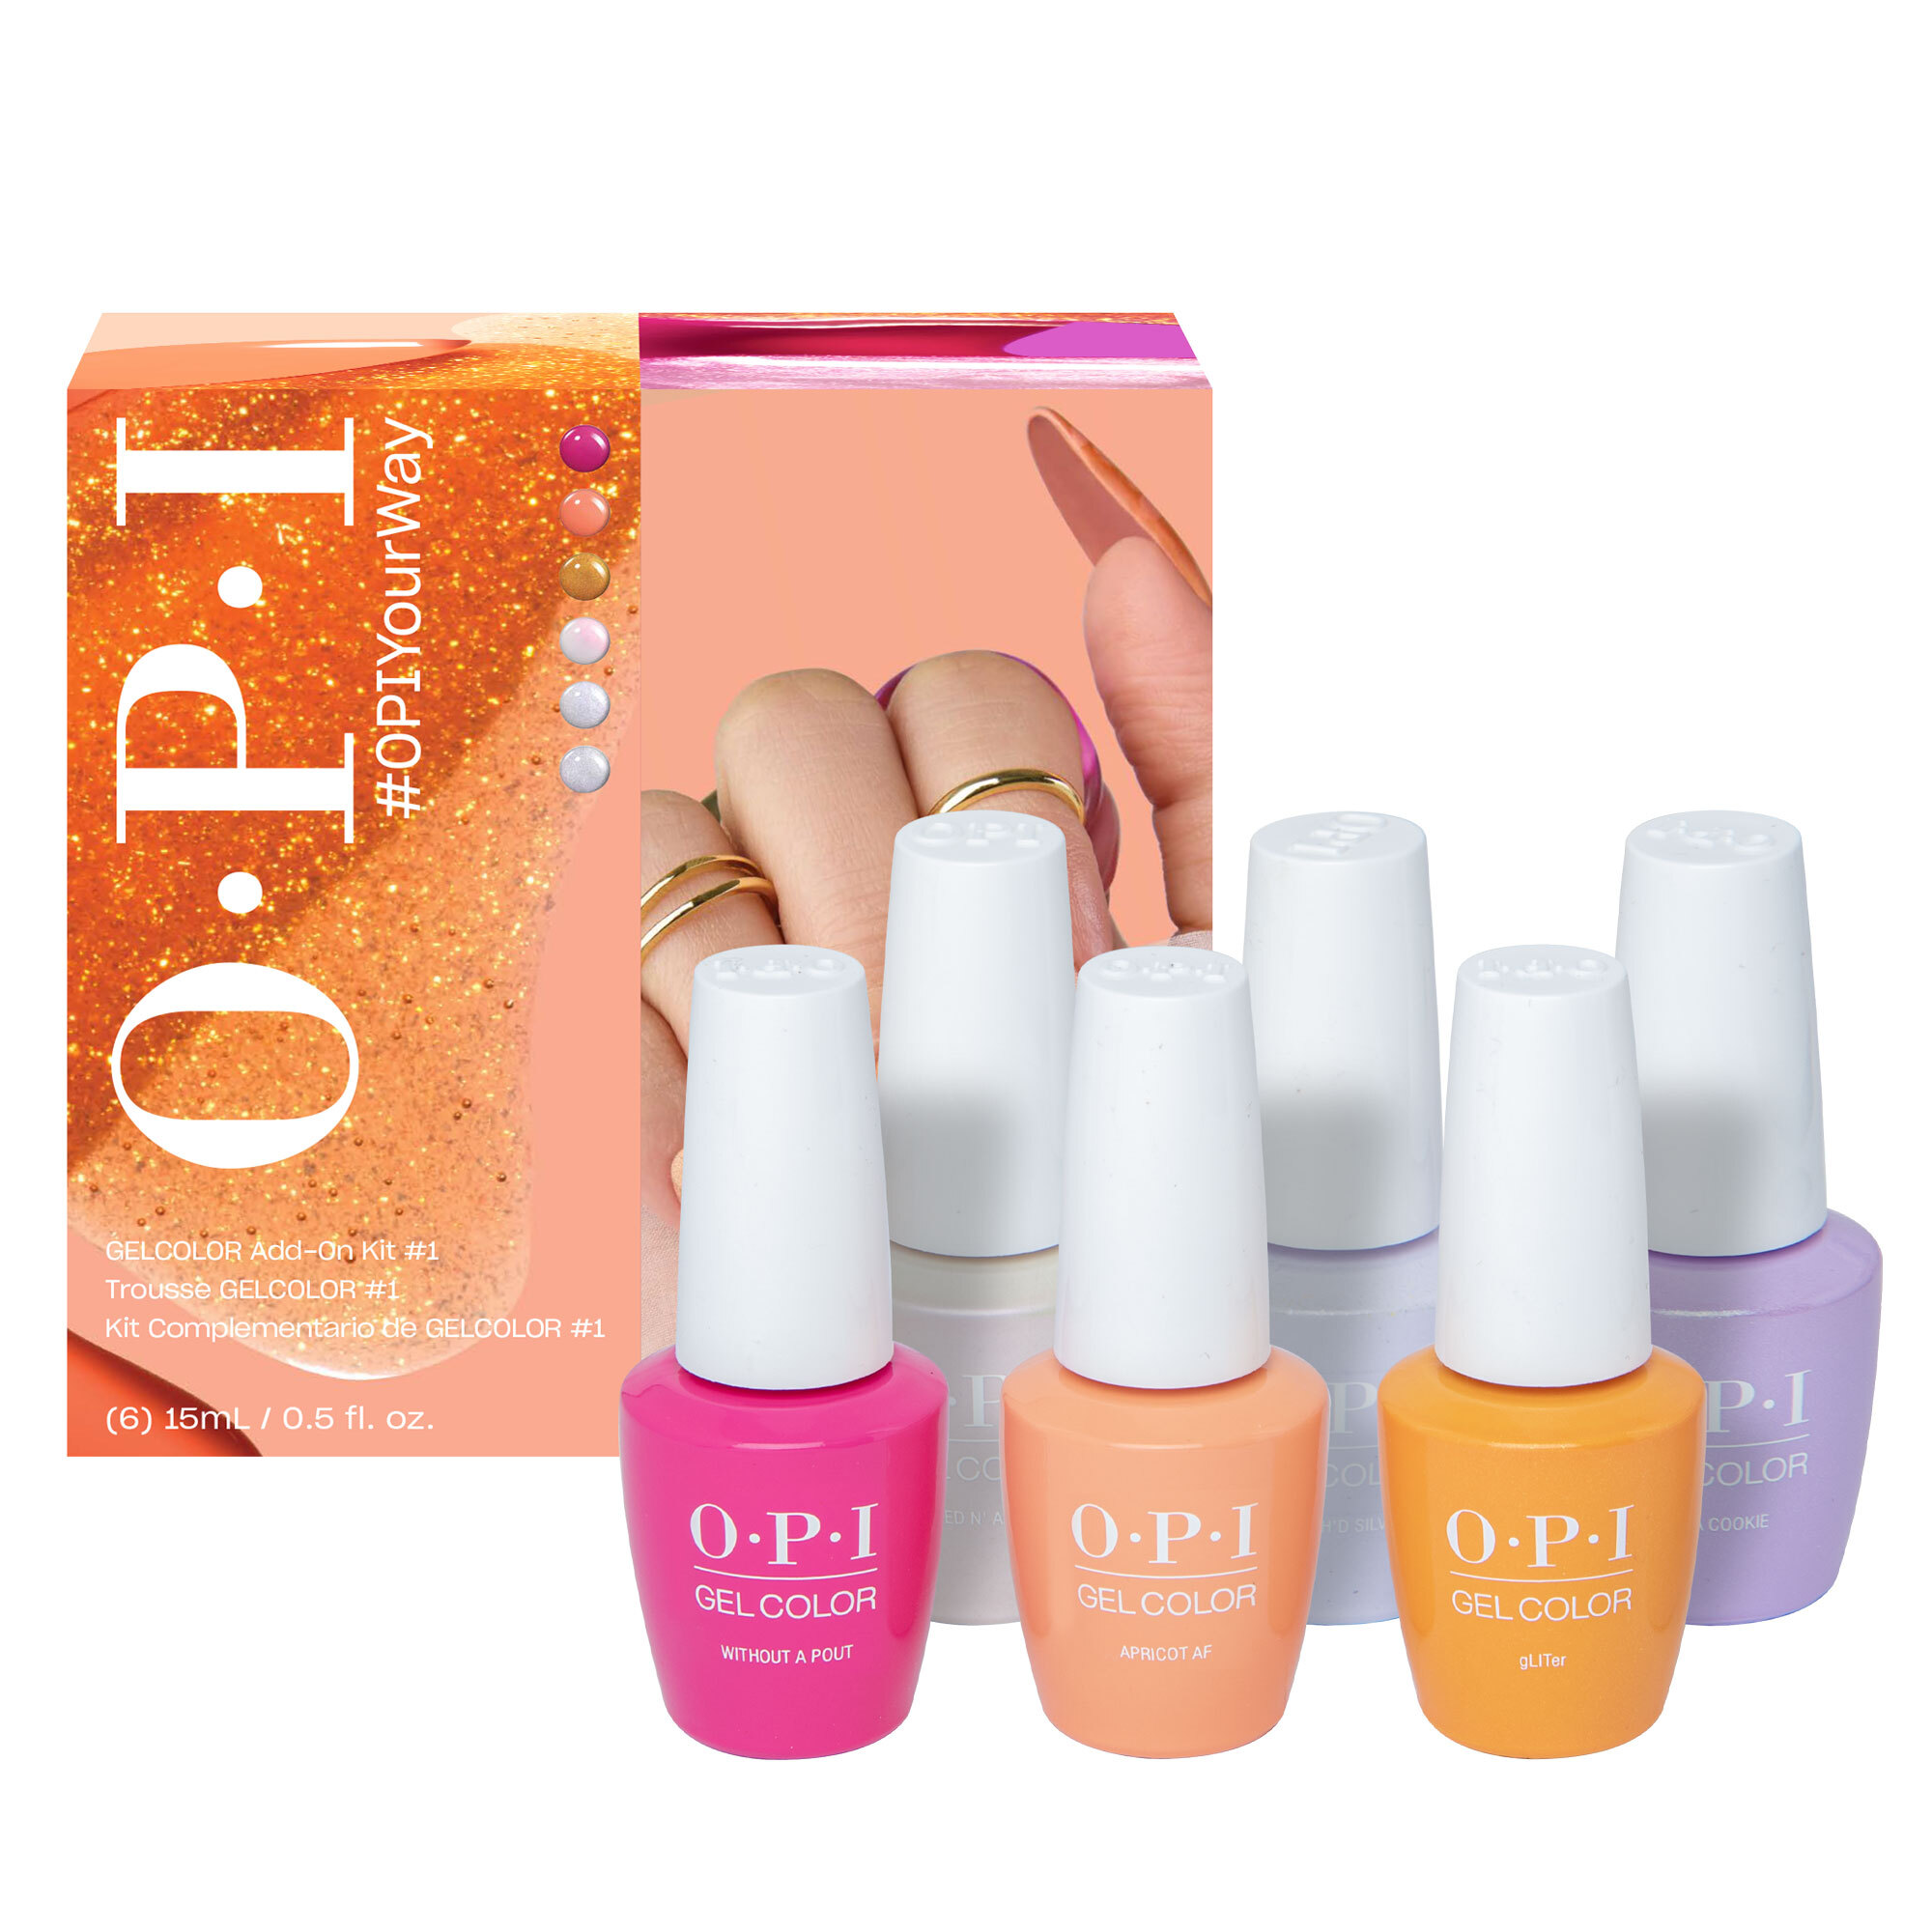 OPI Gelcolor 360 Add on Kit #1 - Your Way